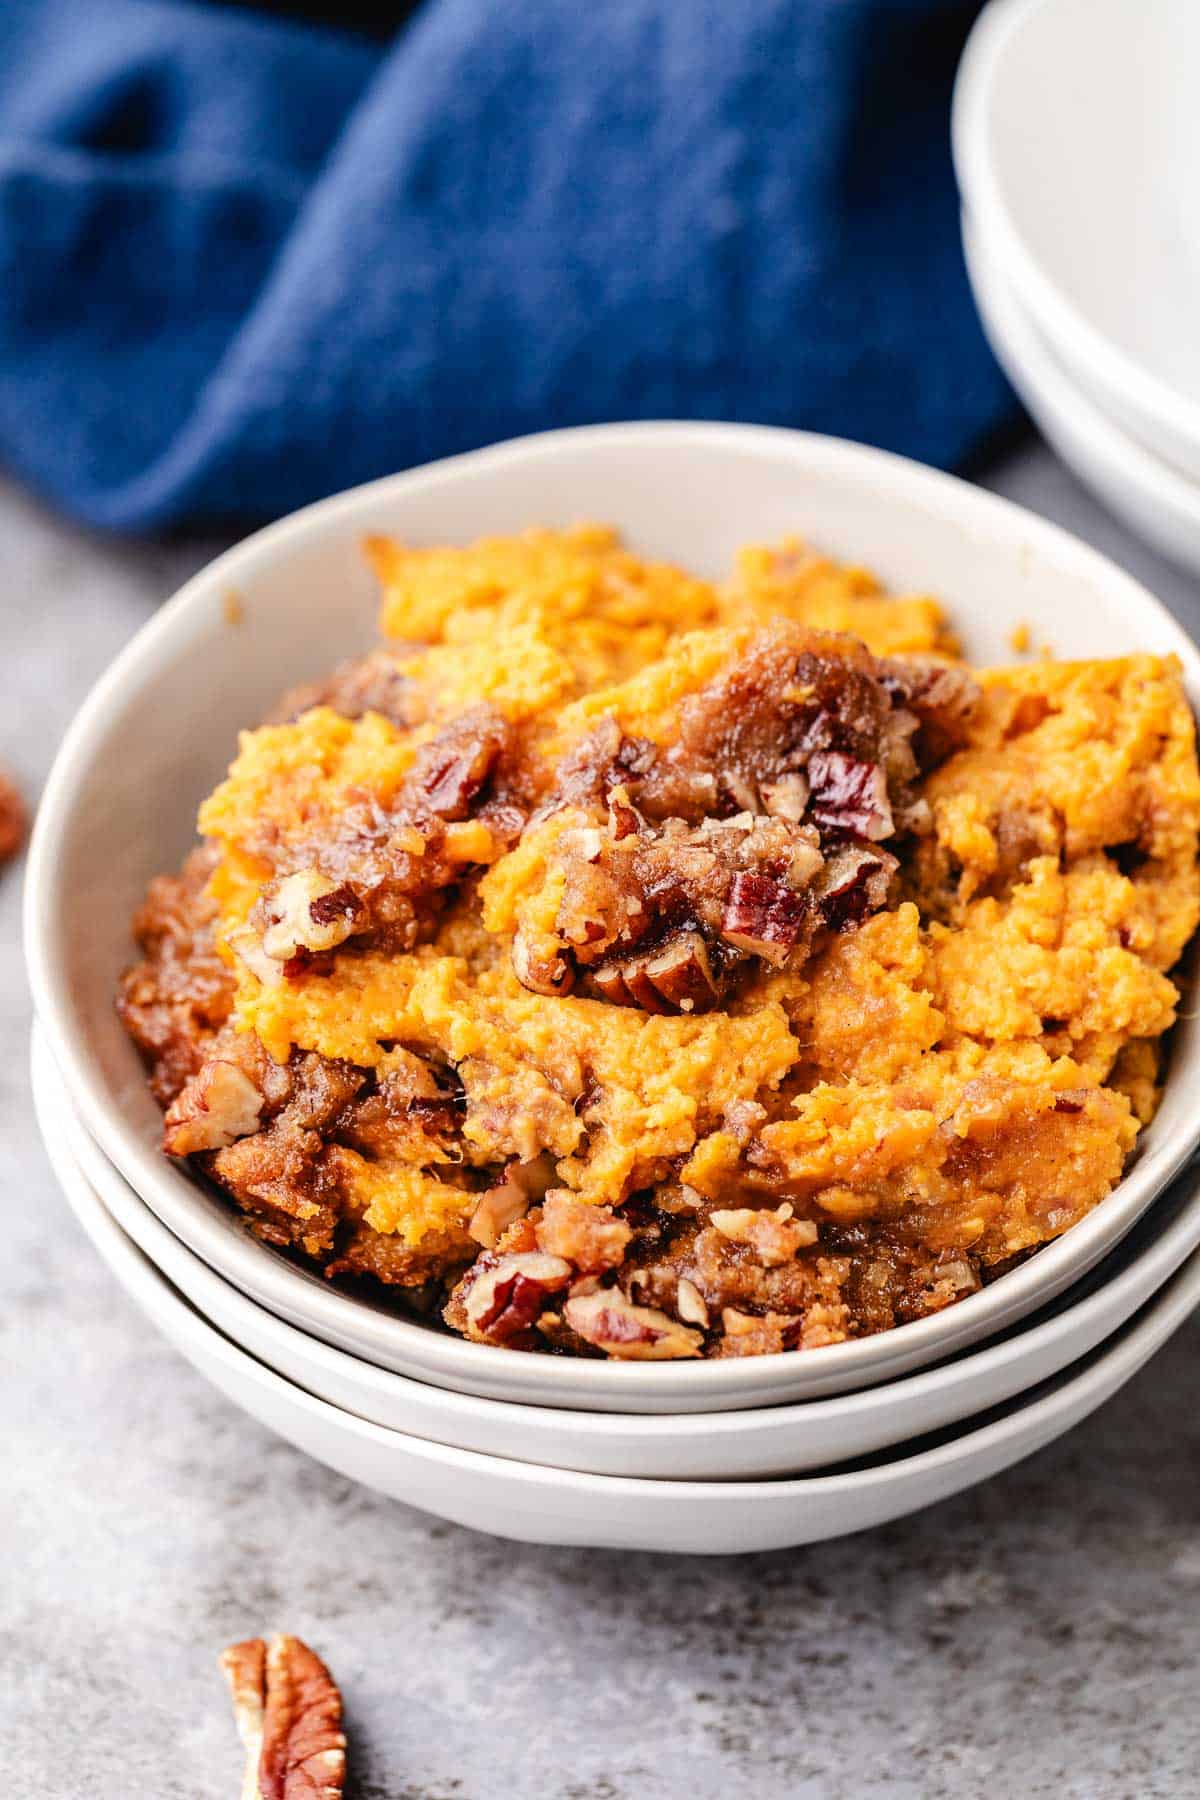 Scoops of sweet potato casserole in a stack of bowls.